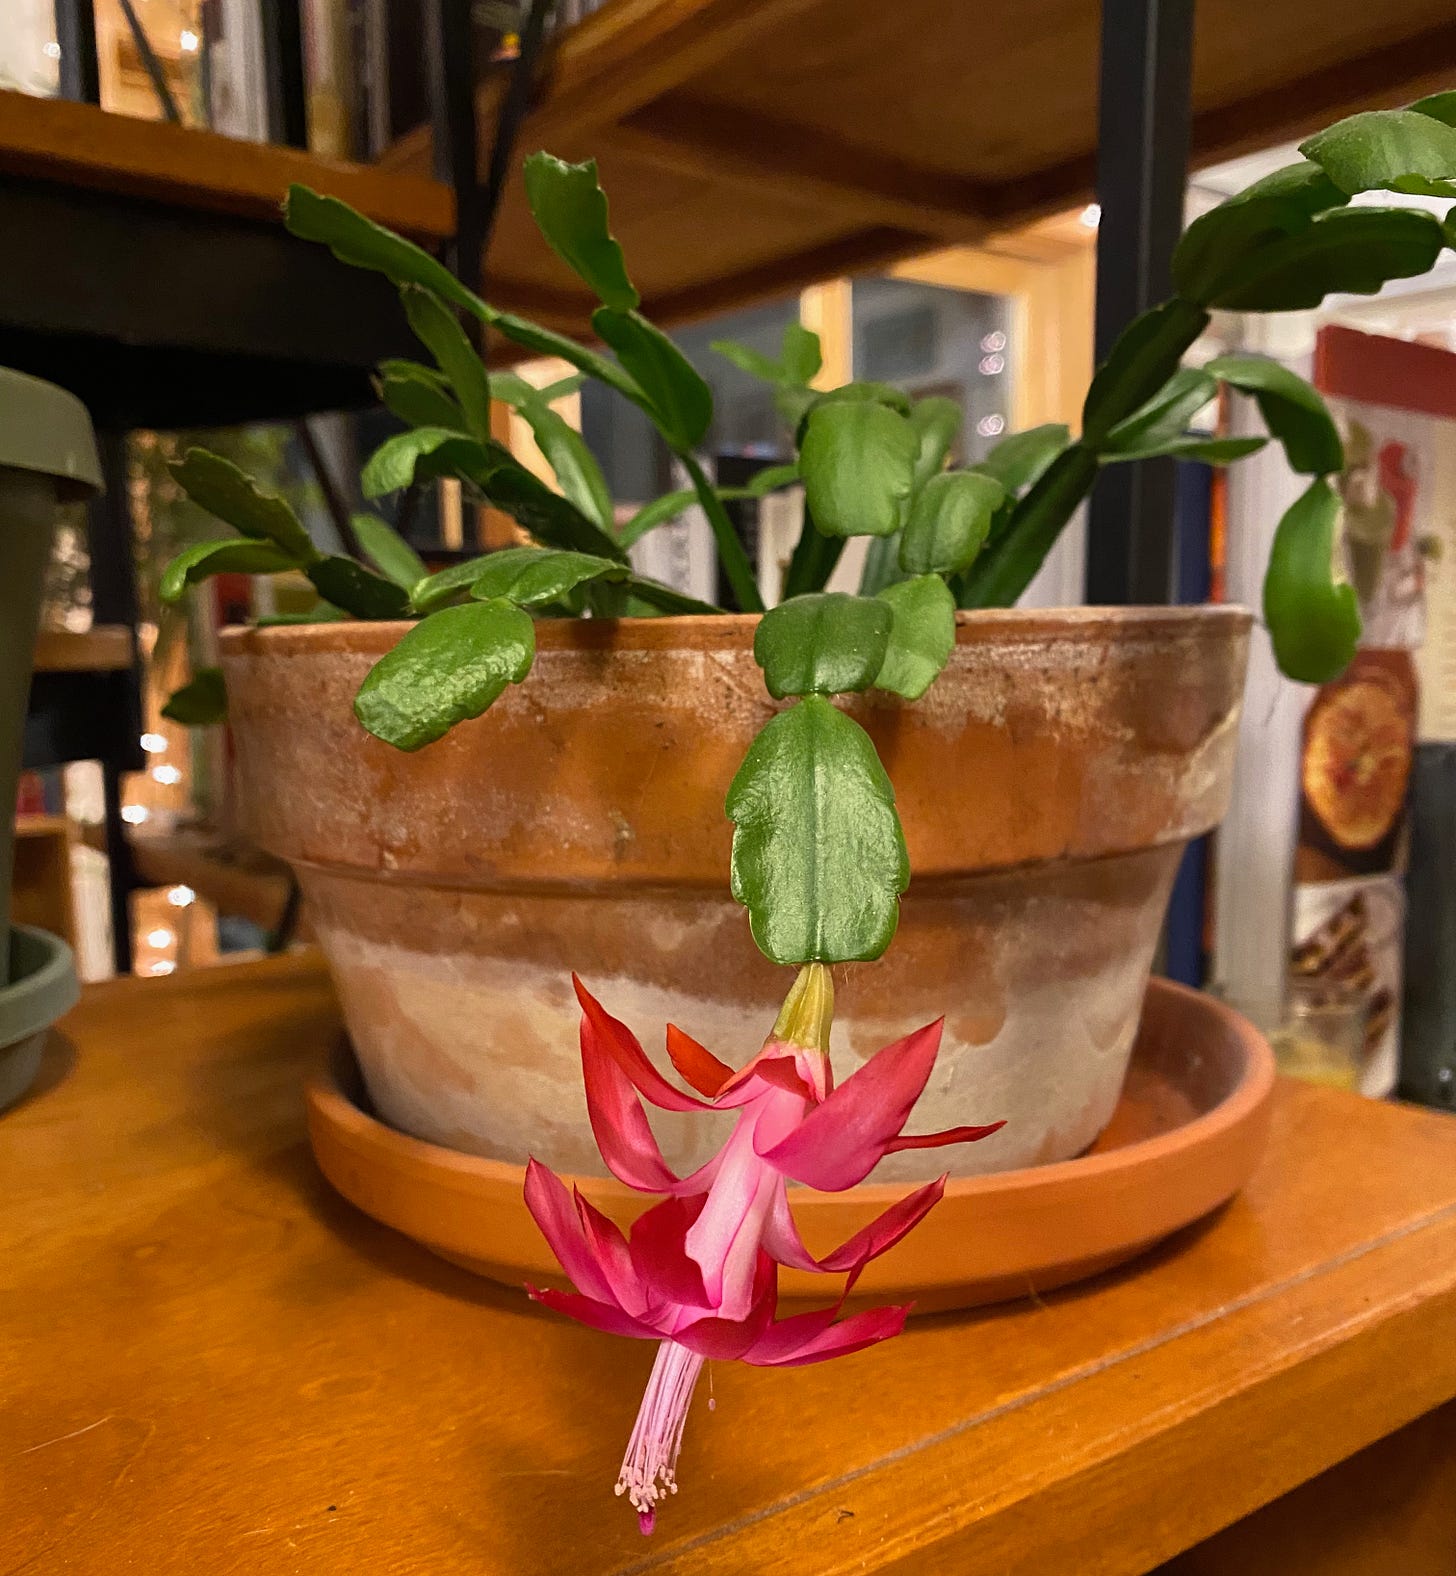 A terracotta pot holding a Christmas cactus, with one many-petaled bright pink flower.